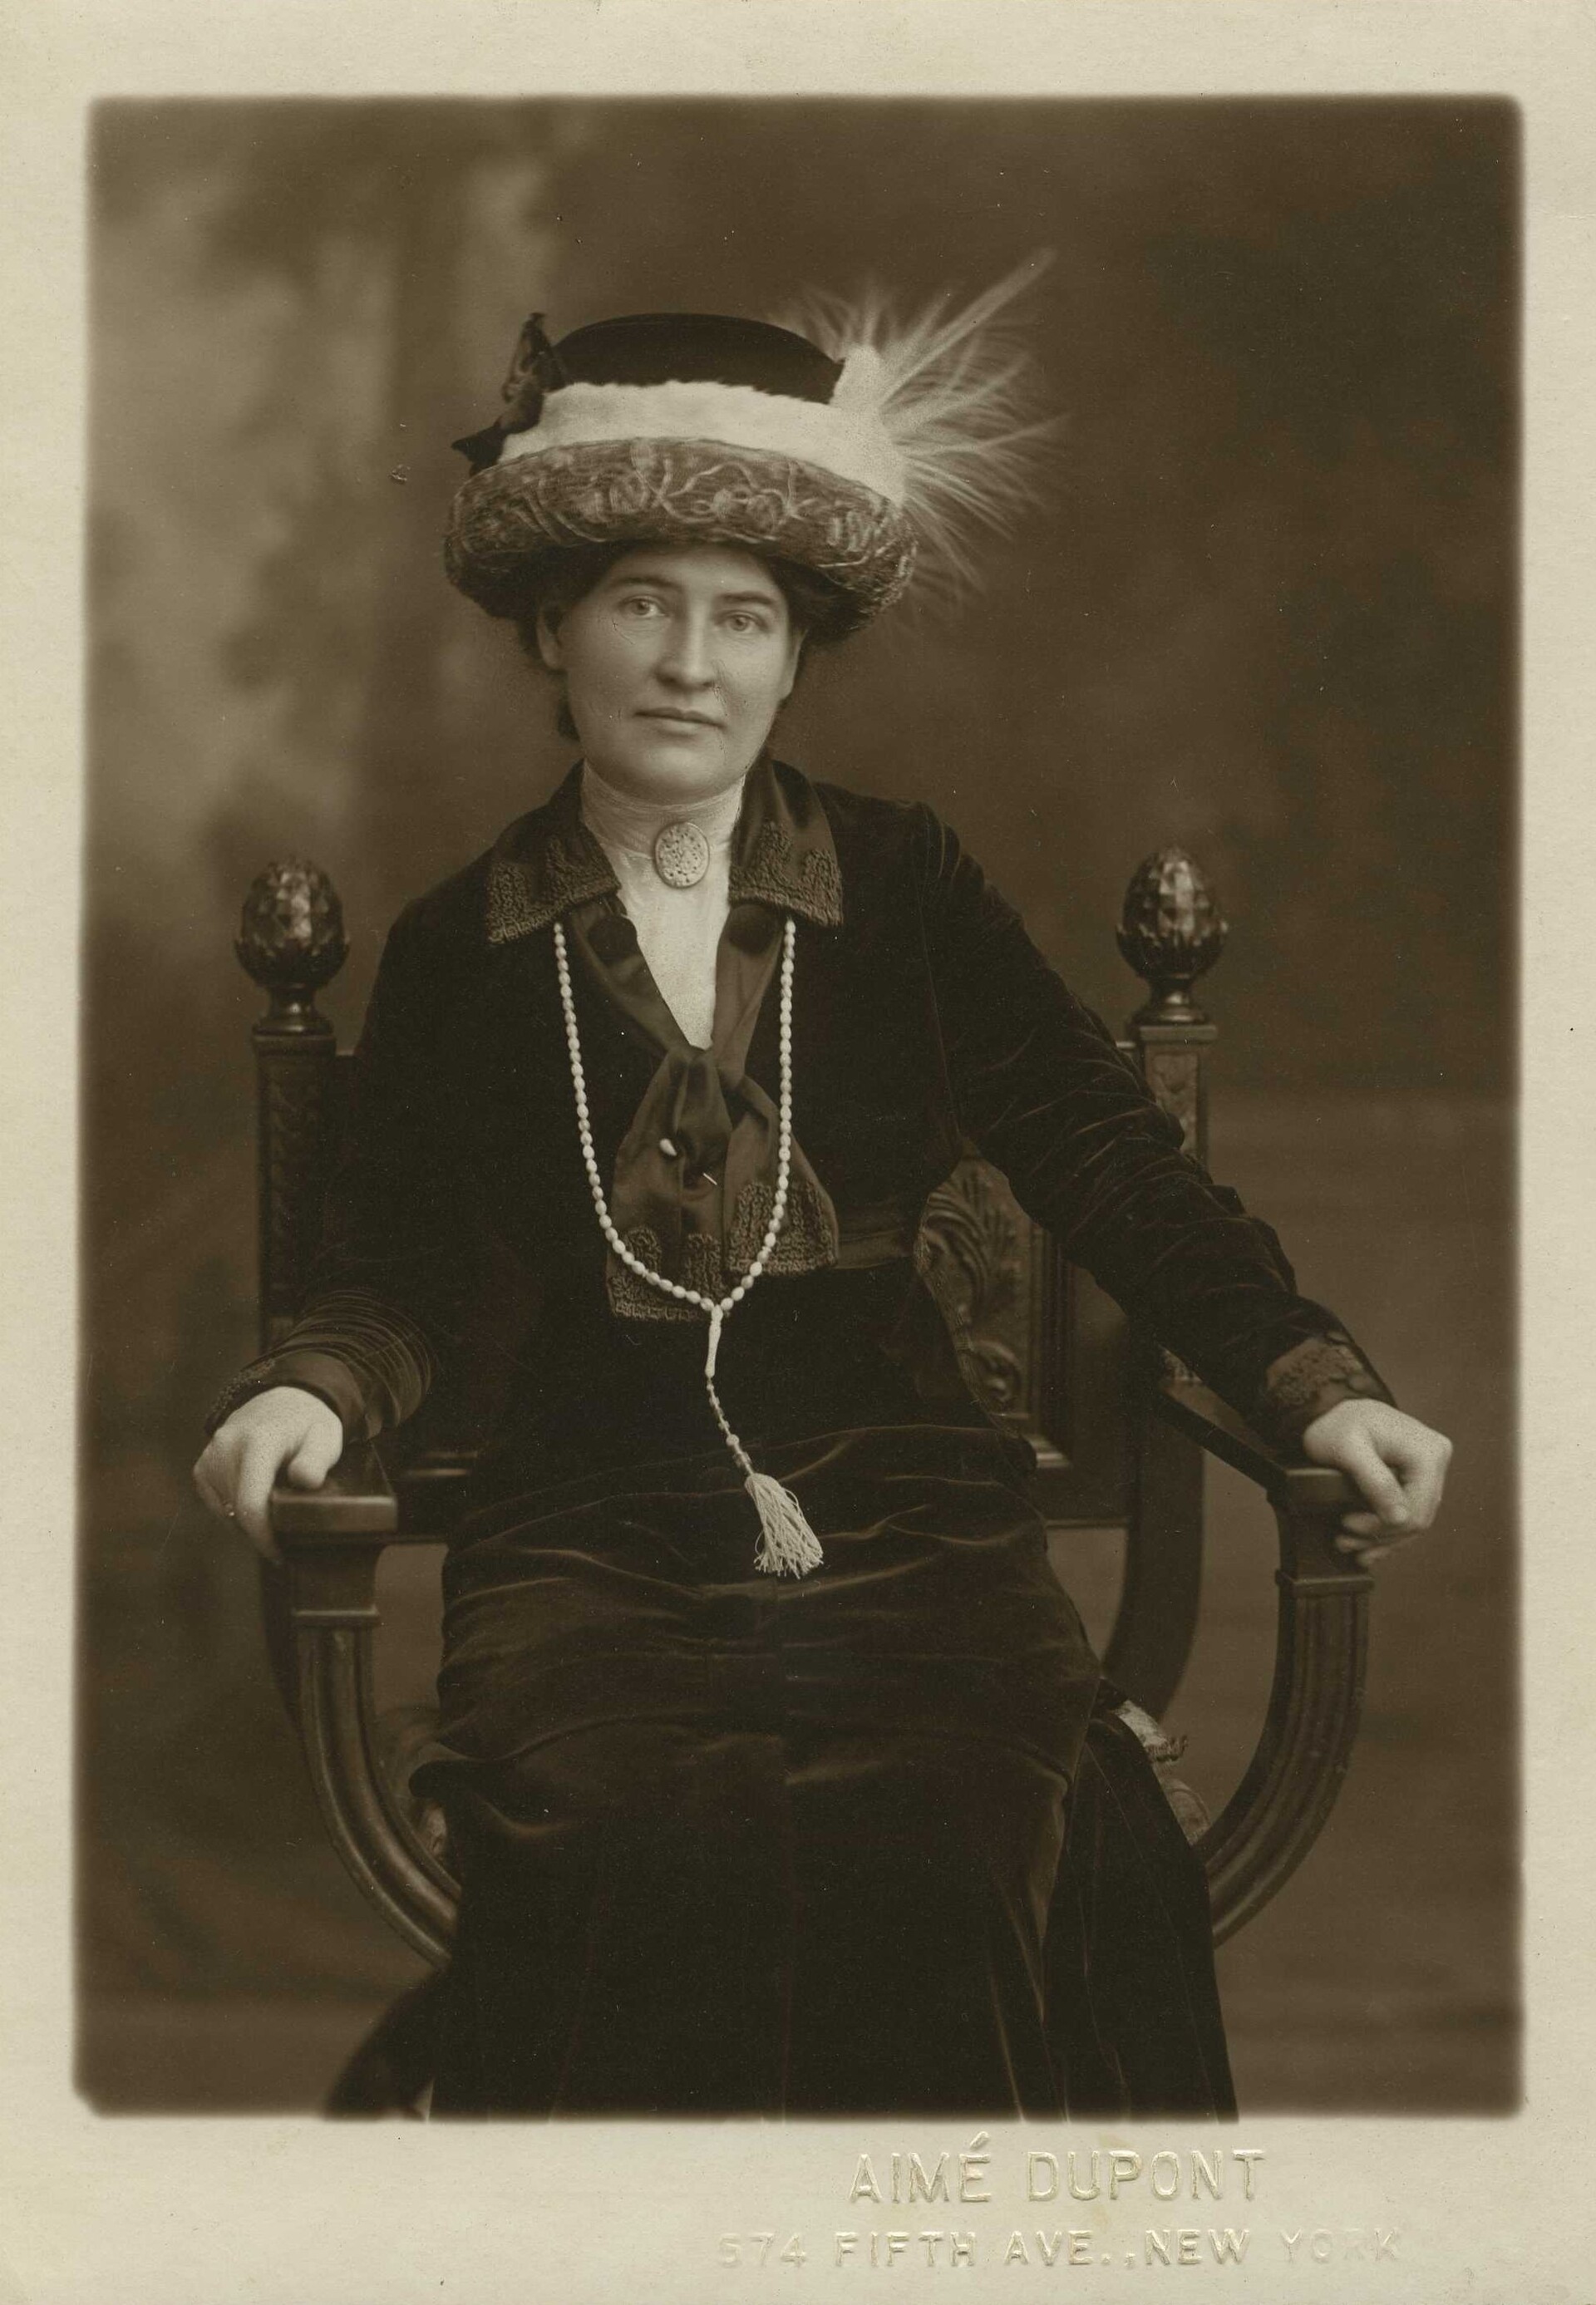 Willa Cather, photographed by Aimé Dupont in New York, circa 1912. Image courtesy of the National Willa Cather Center.